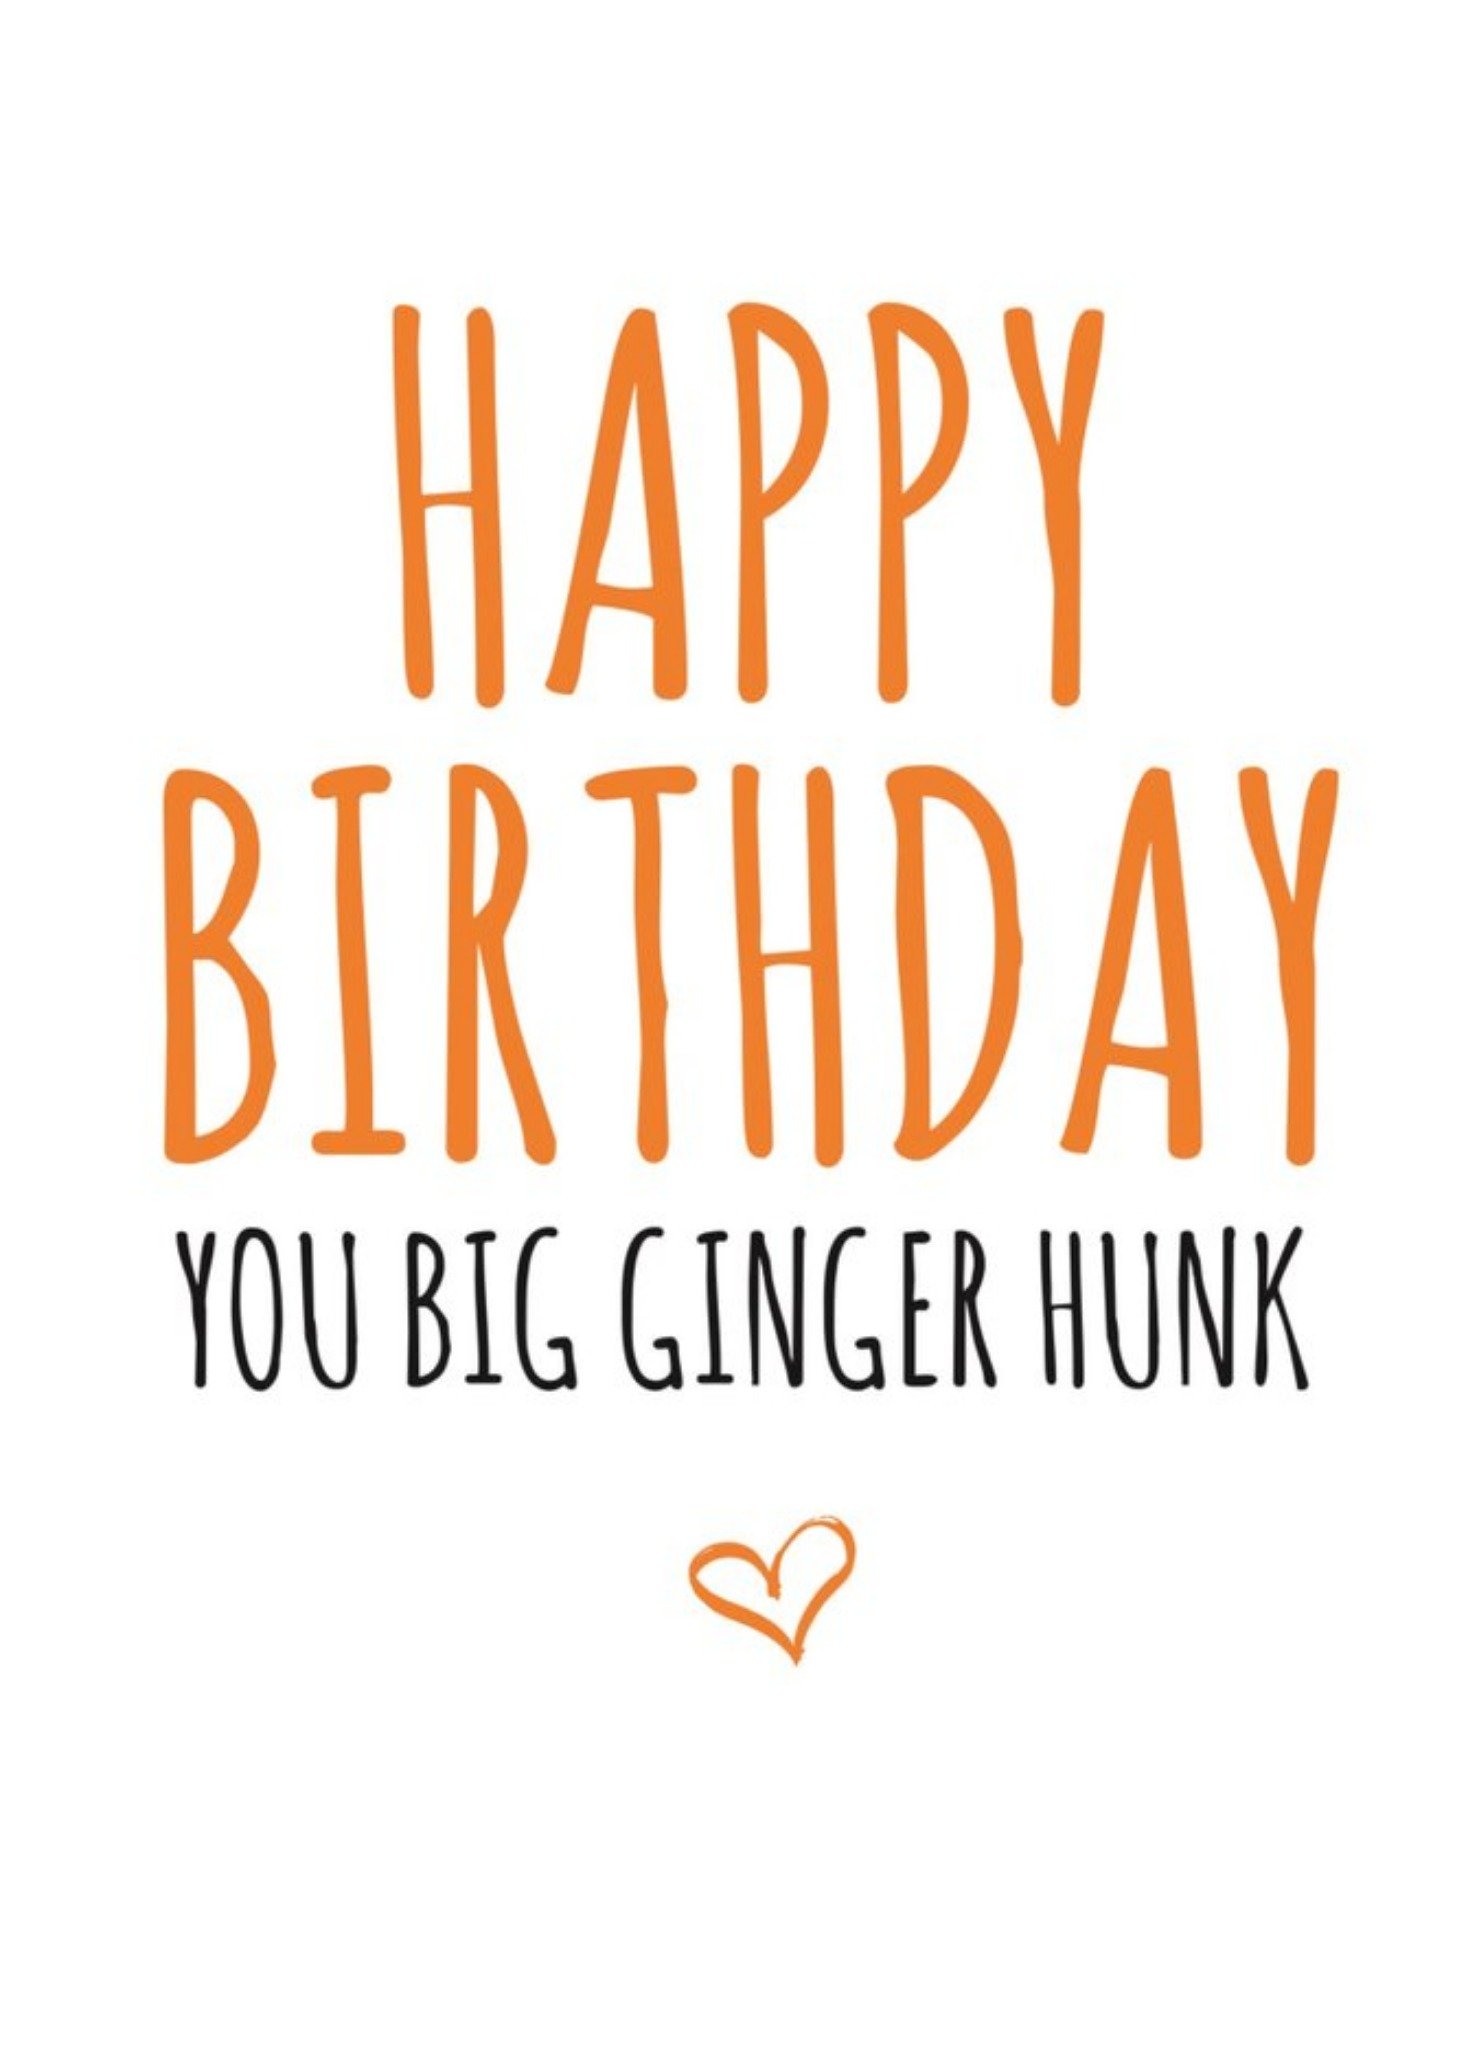 Banter King Typographical Happy Birthday You Big Ginger Hunk Card, Large